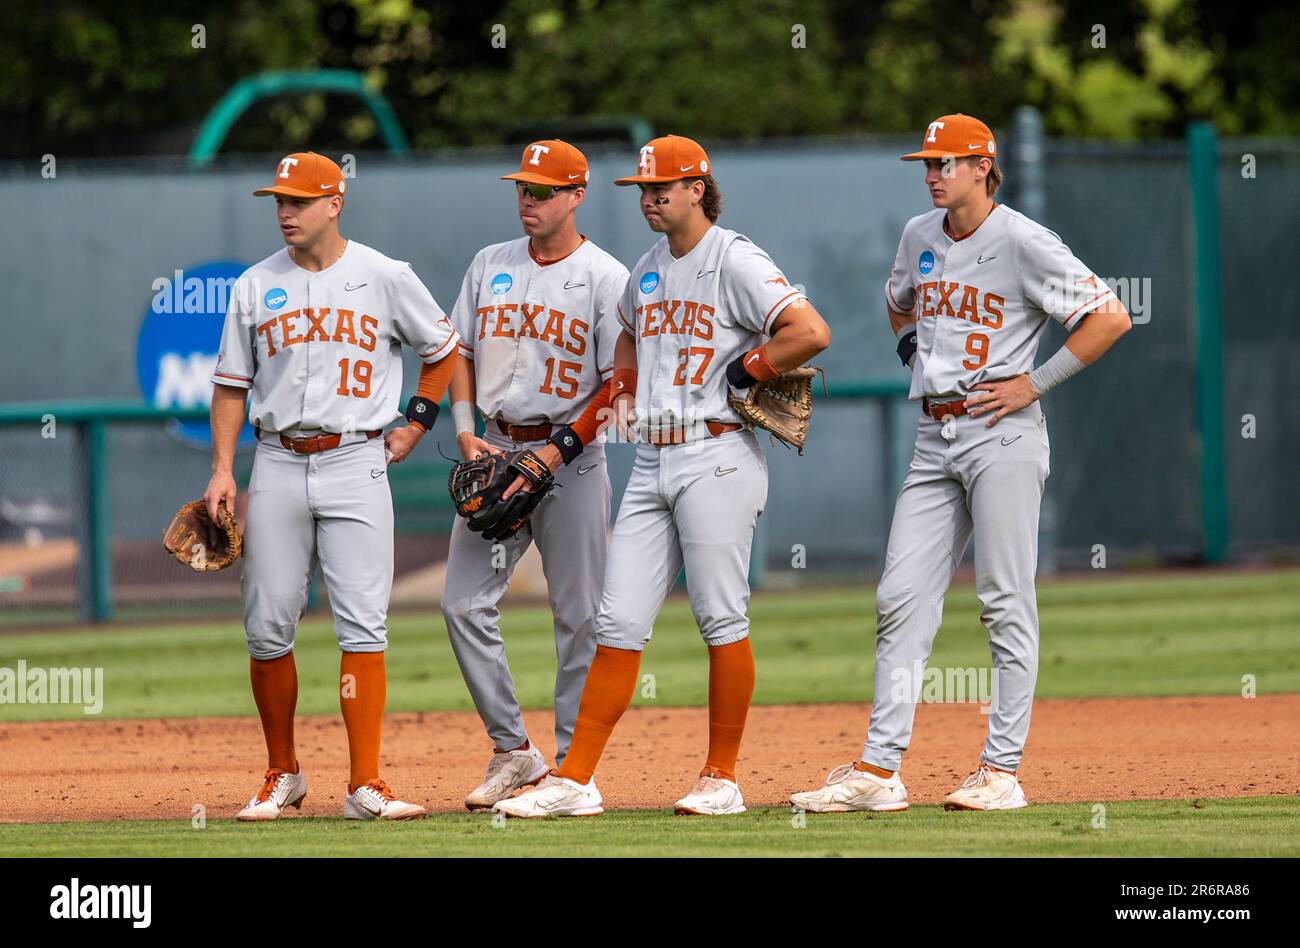 Palo Alto Calif, USA. 10th June, 2023. Texas catcher/third base Peyton Powell (15), Texas infielder Jack O'Dowd (27)and Texas infielder Jared Thomas (9)looks on as the new pitcher warm up during the NCAA Super Regional Baseball game between Texas Longhorns and the Stanford Cardinal. Texas beat Stanford 7-5 at Klein Field at Sunken Diamond in Palo Alto Calif. Thurman James/CSM/Alamy Live News Stock Photo